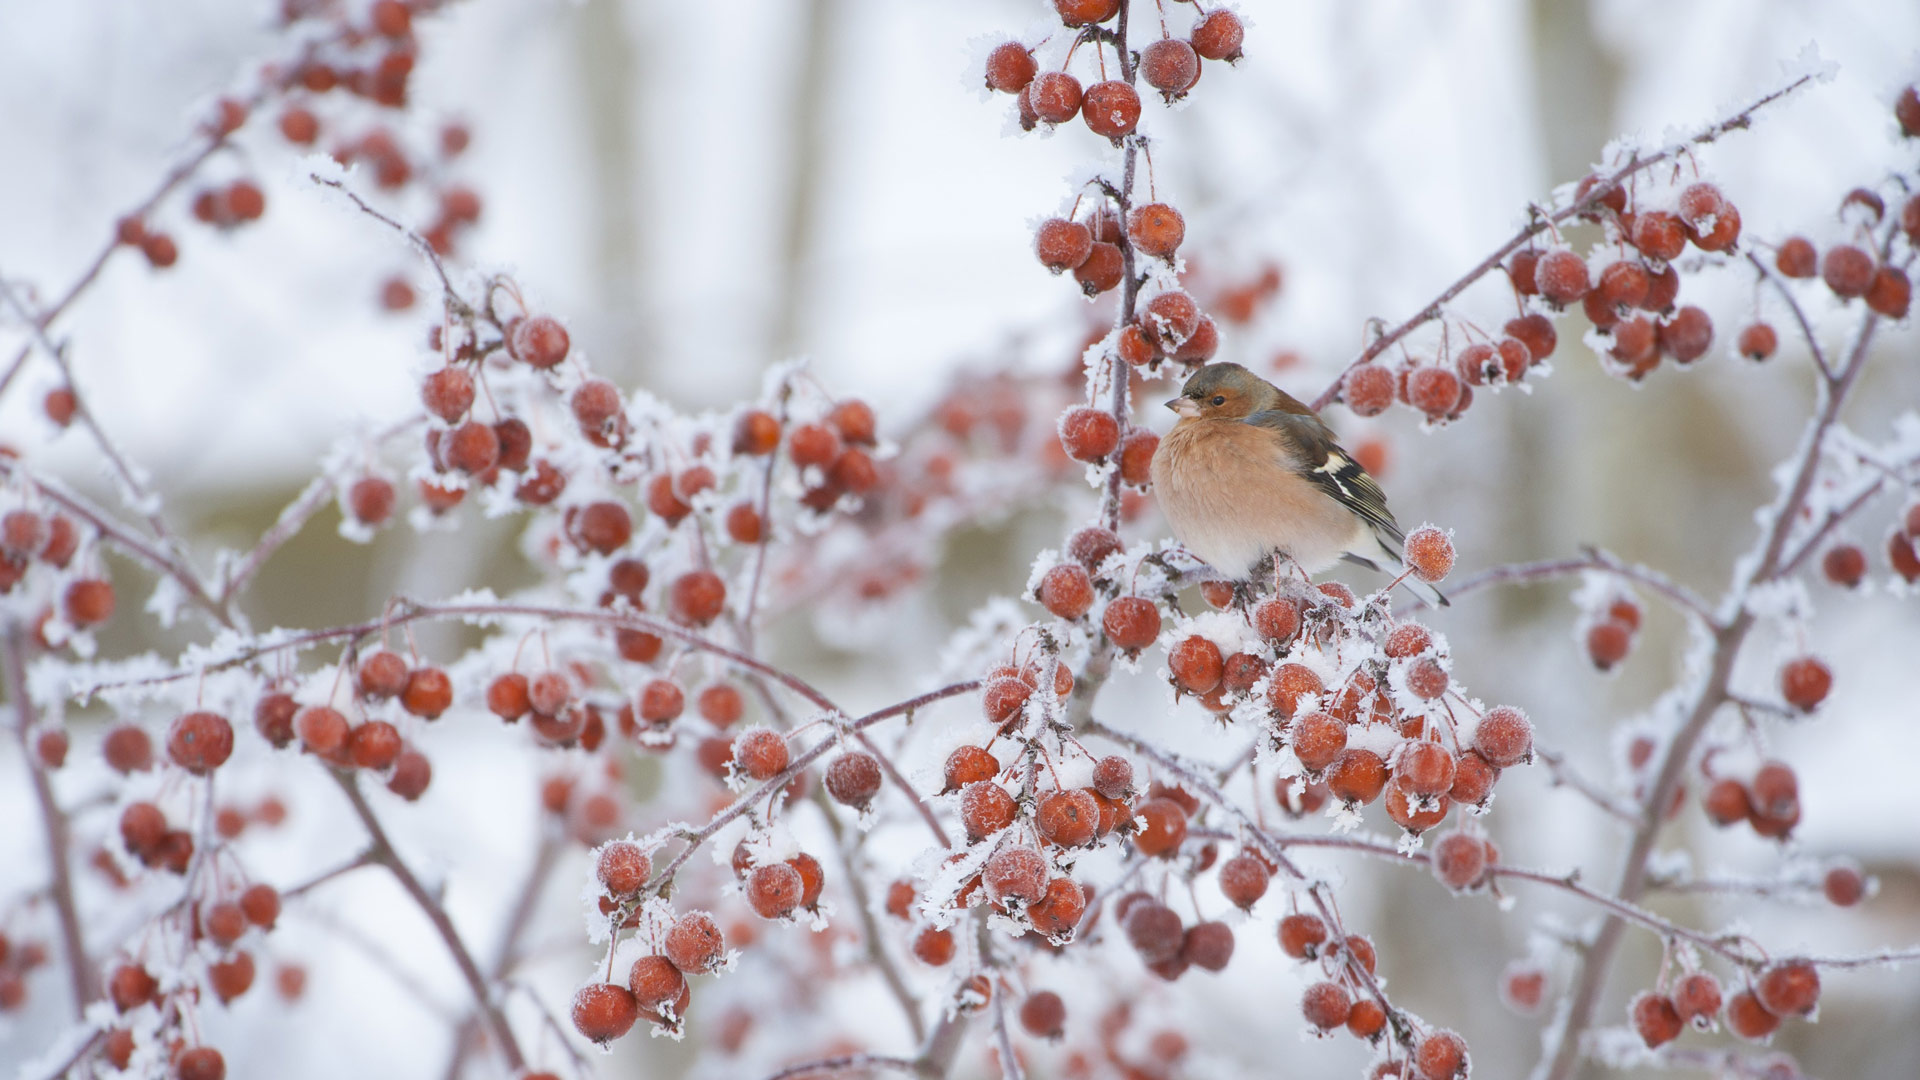 Bing image: A male chaffinch in a crab apple tree - Bing Wallpaper Gallery